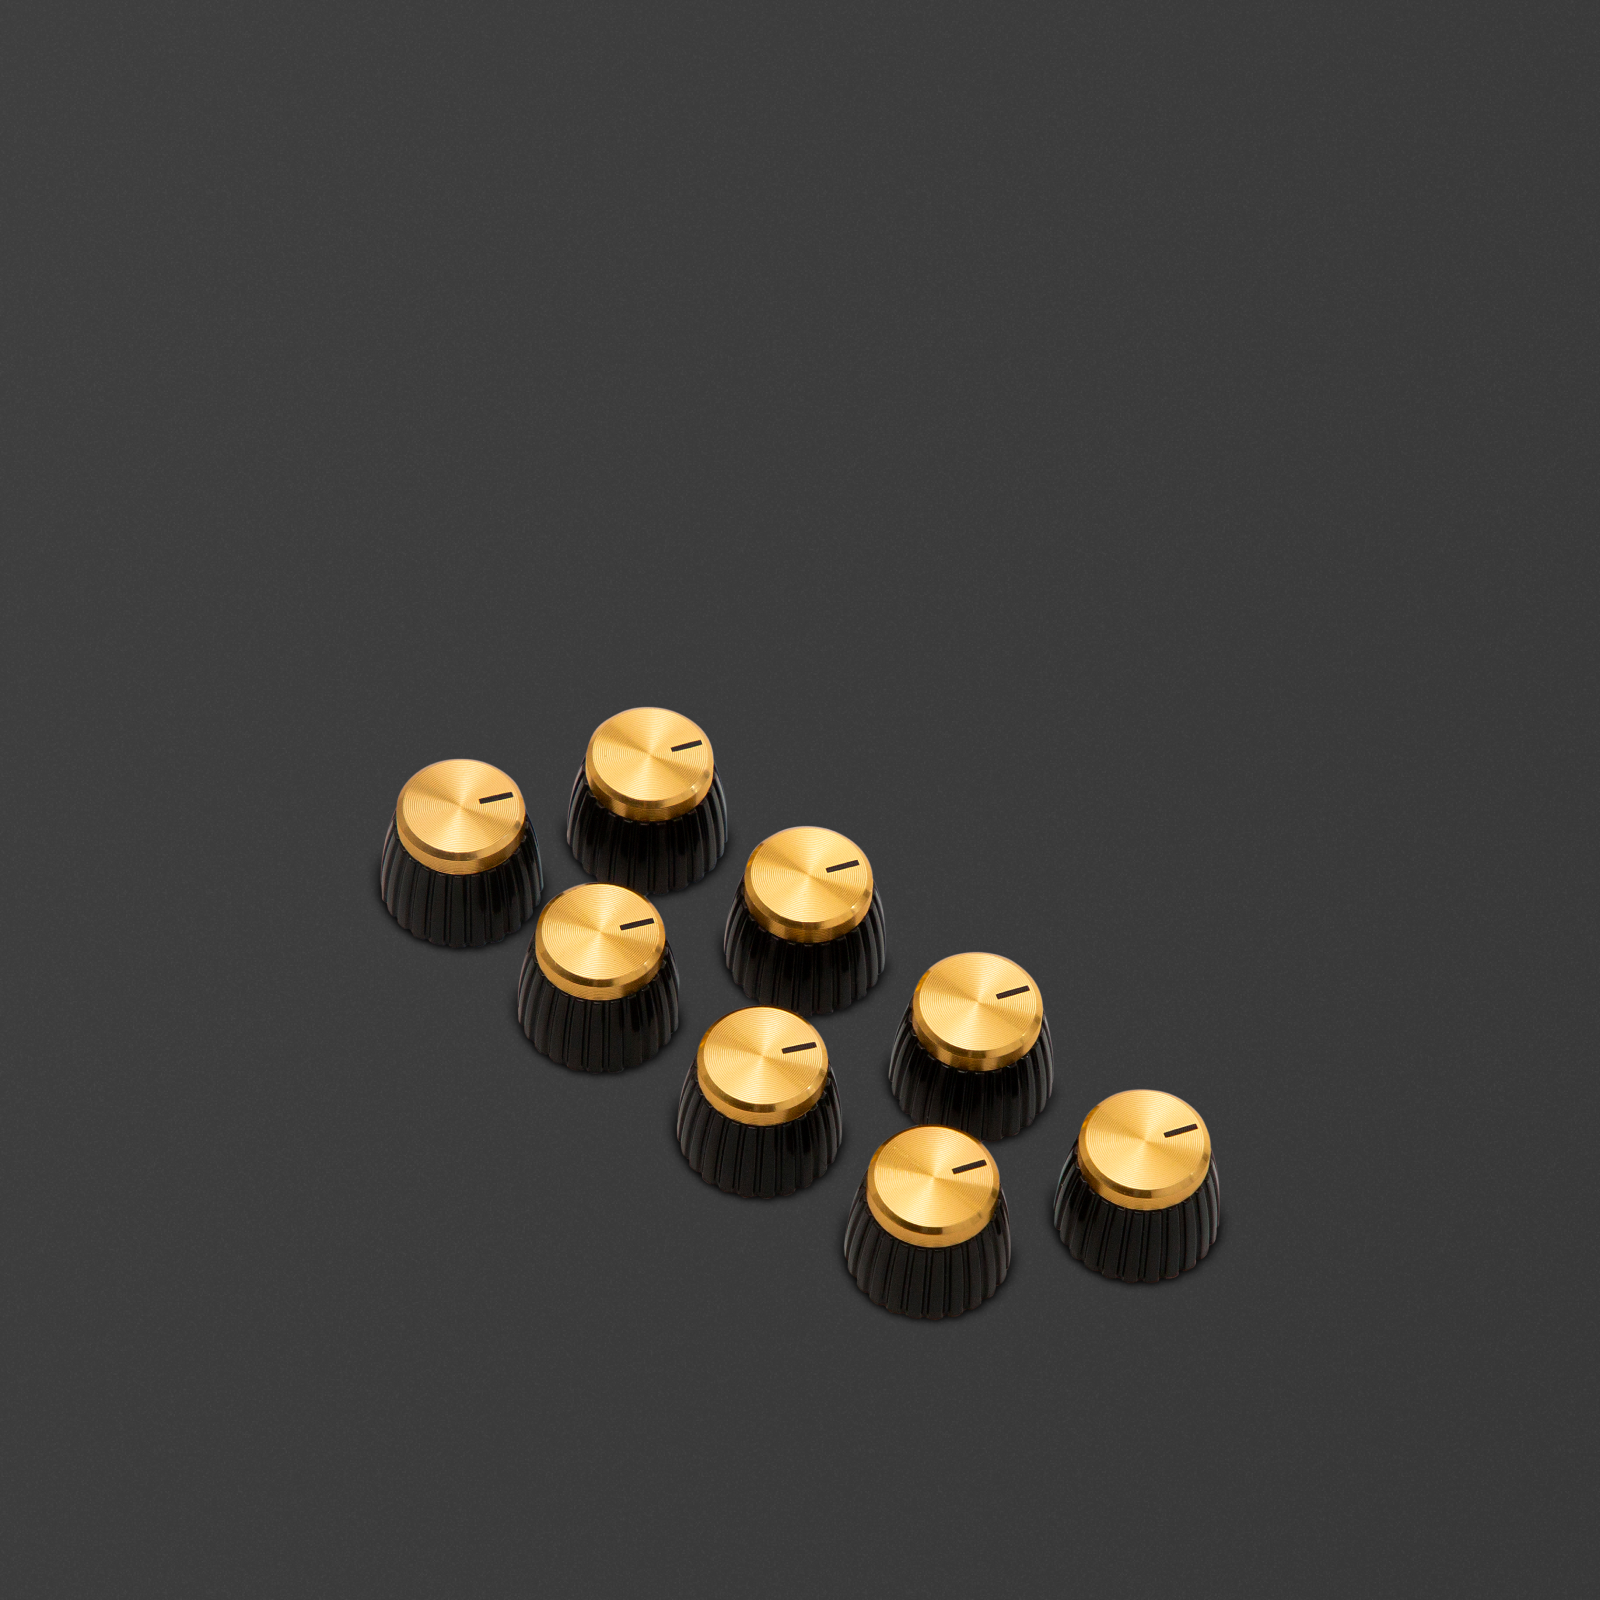 Push-up Knobs in brown and gold. 